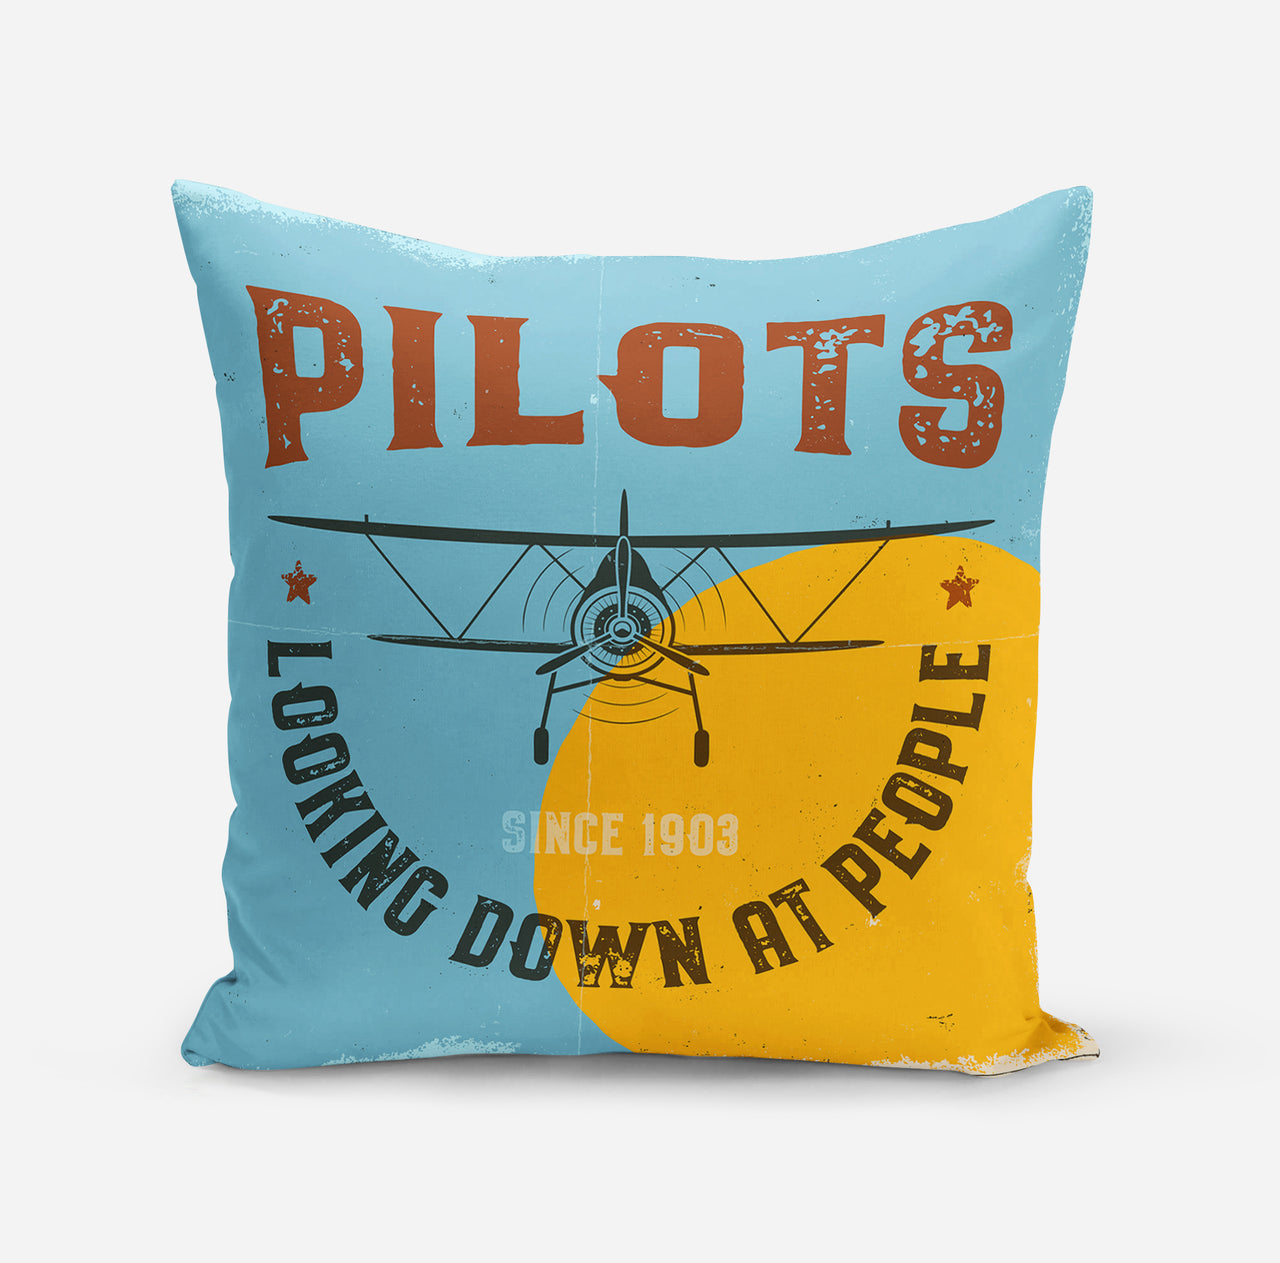 Pilots Looking Down at People Since 1903 Designed Pillows